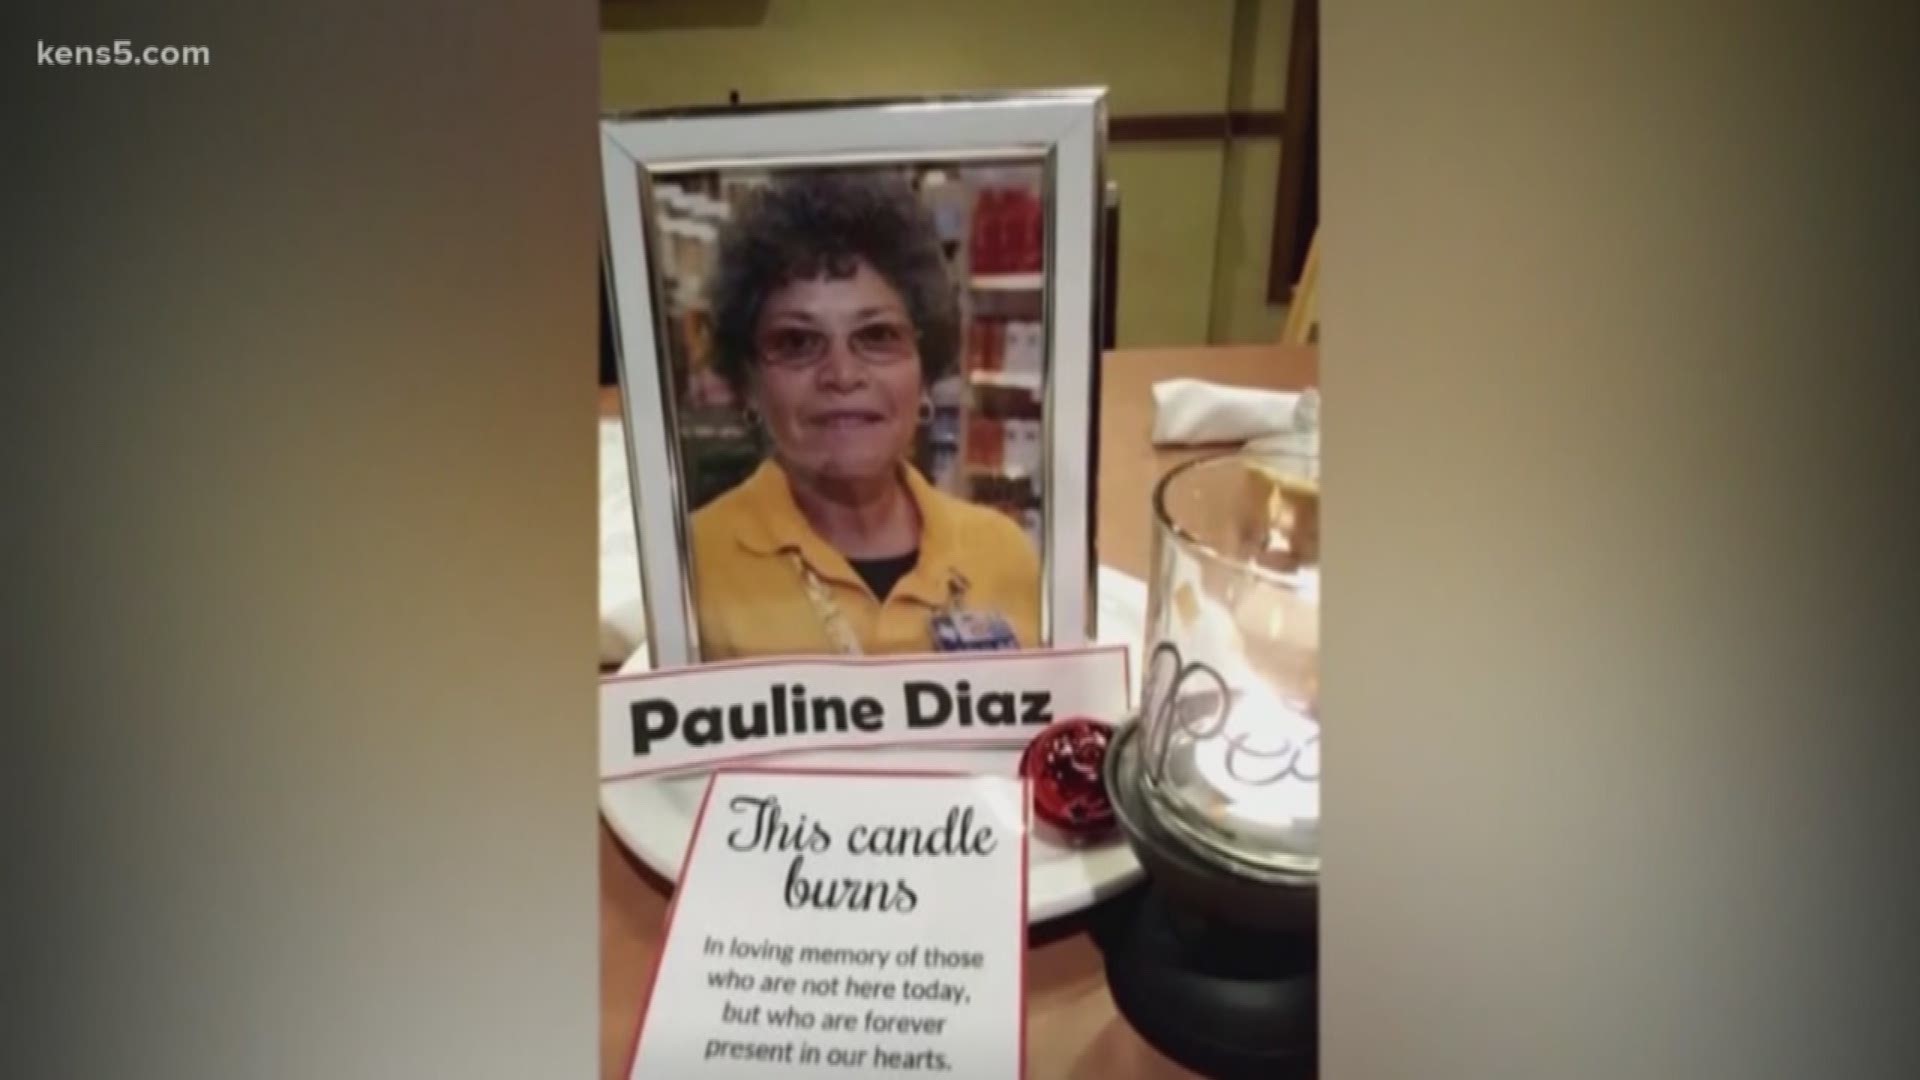 Pauline Diaz vanished after her shift at H-E-B nine years ago. On her birthday, her family says they hope she's still alive.